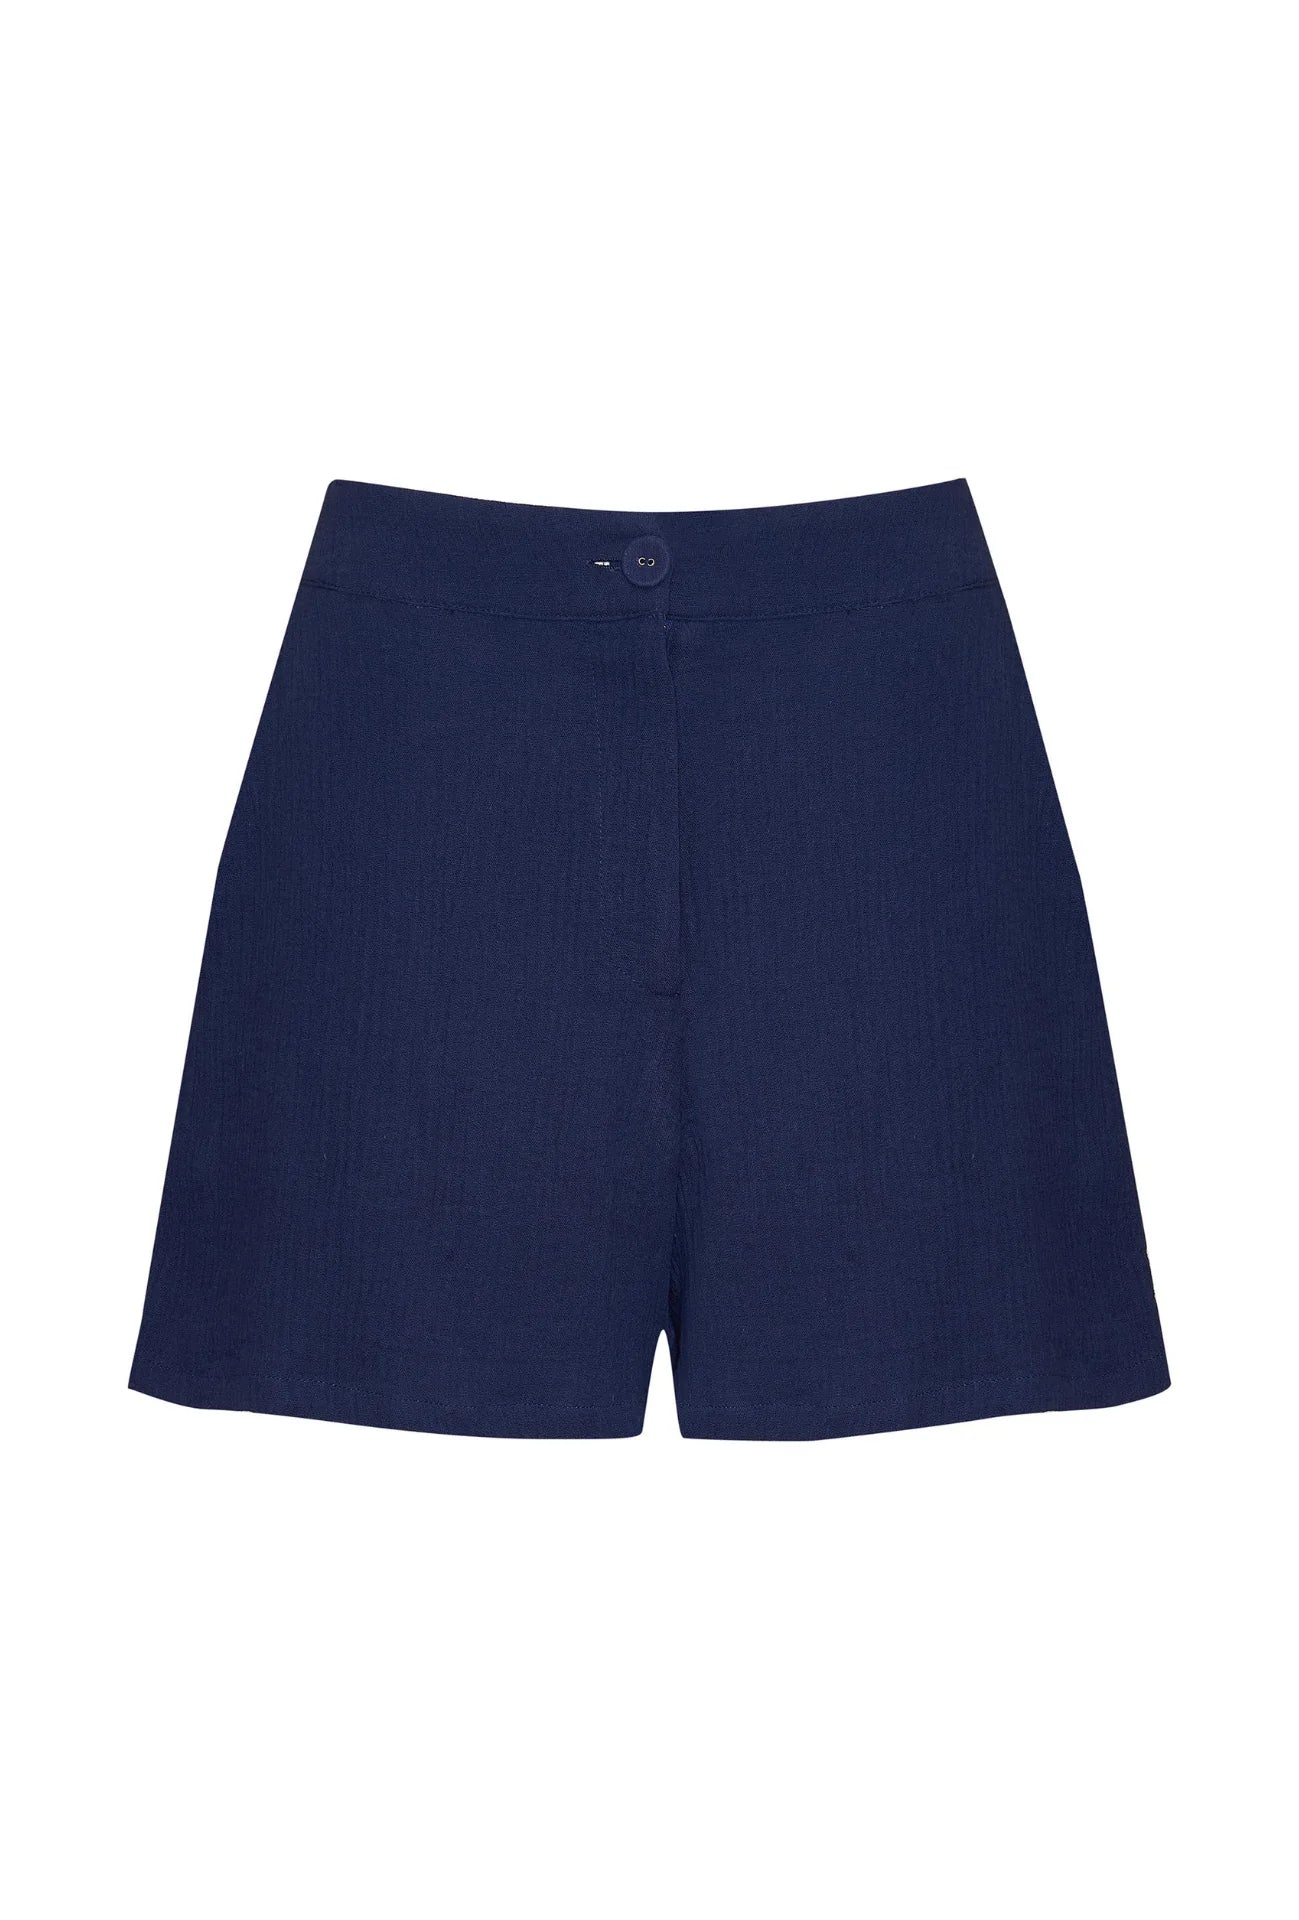 Gilly Shorts Deep Blue